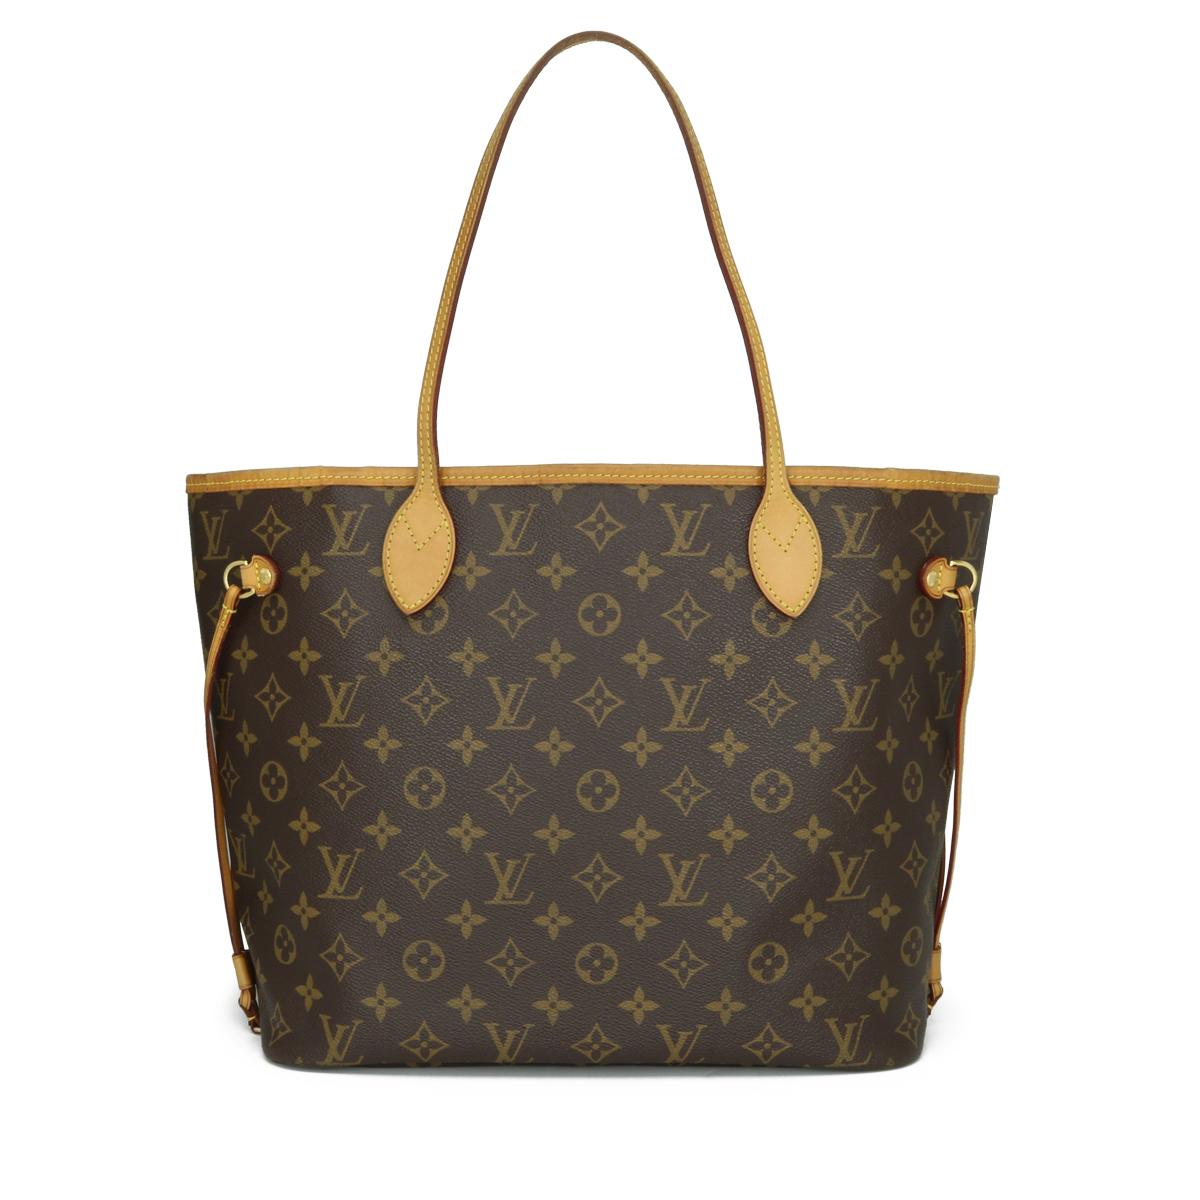 Louis Vuitton Neverfull MM in Monogram with Beige Interior 2014.

This bag is in good condition. 

- Exterior Condition: Good condition. Light storage creasing to the canvas. Light surface rubbing to four base corners. General marking and leather